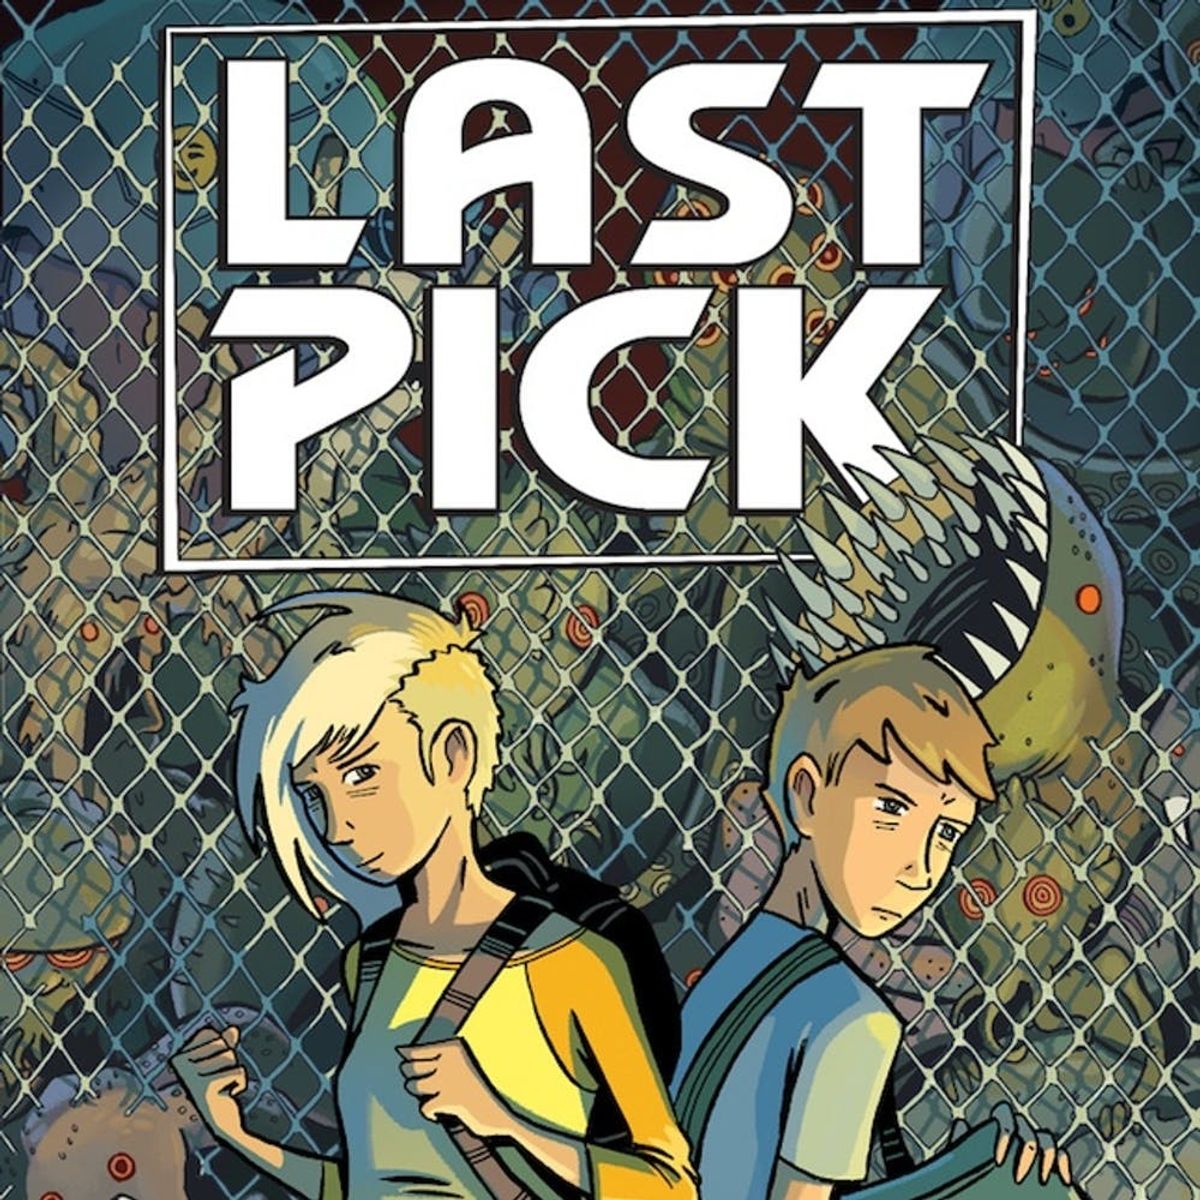 3 New Graphic Novels About Coming of Age